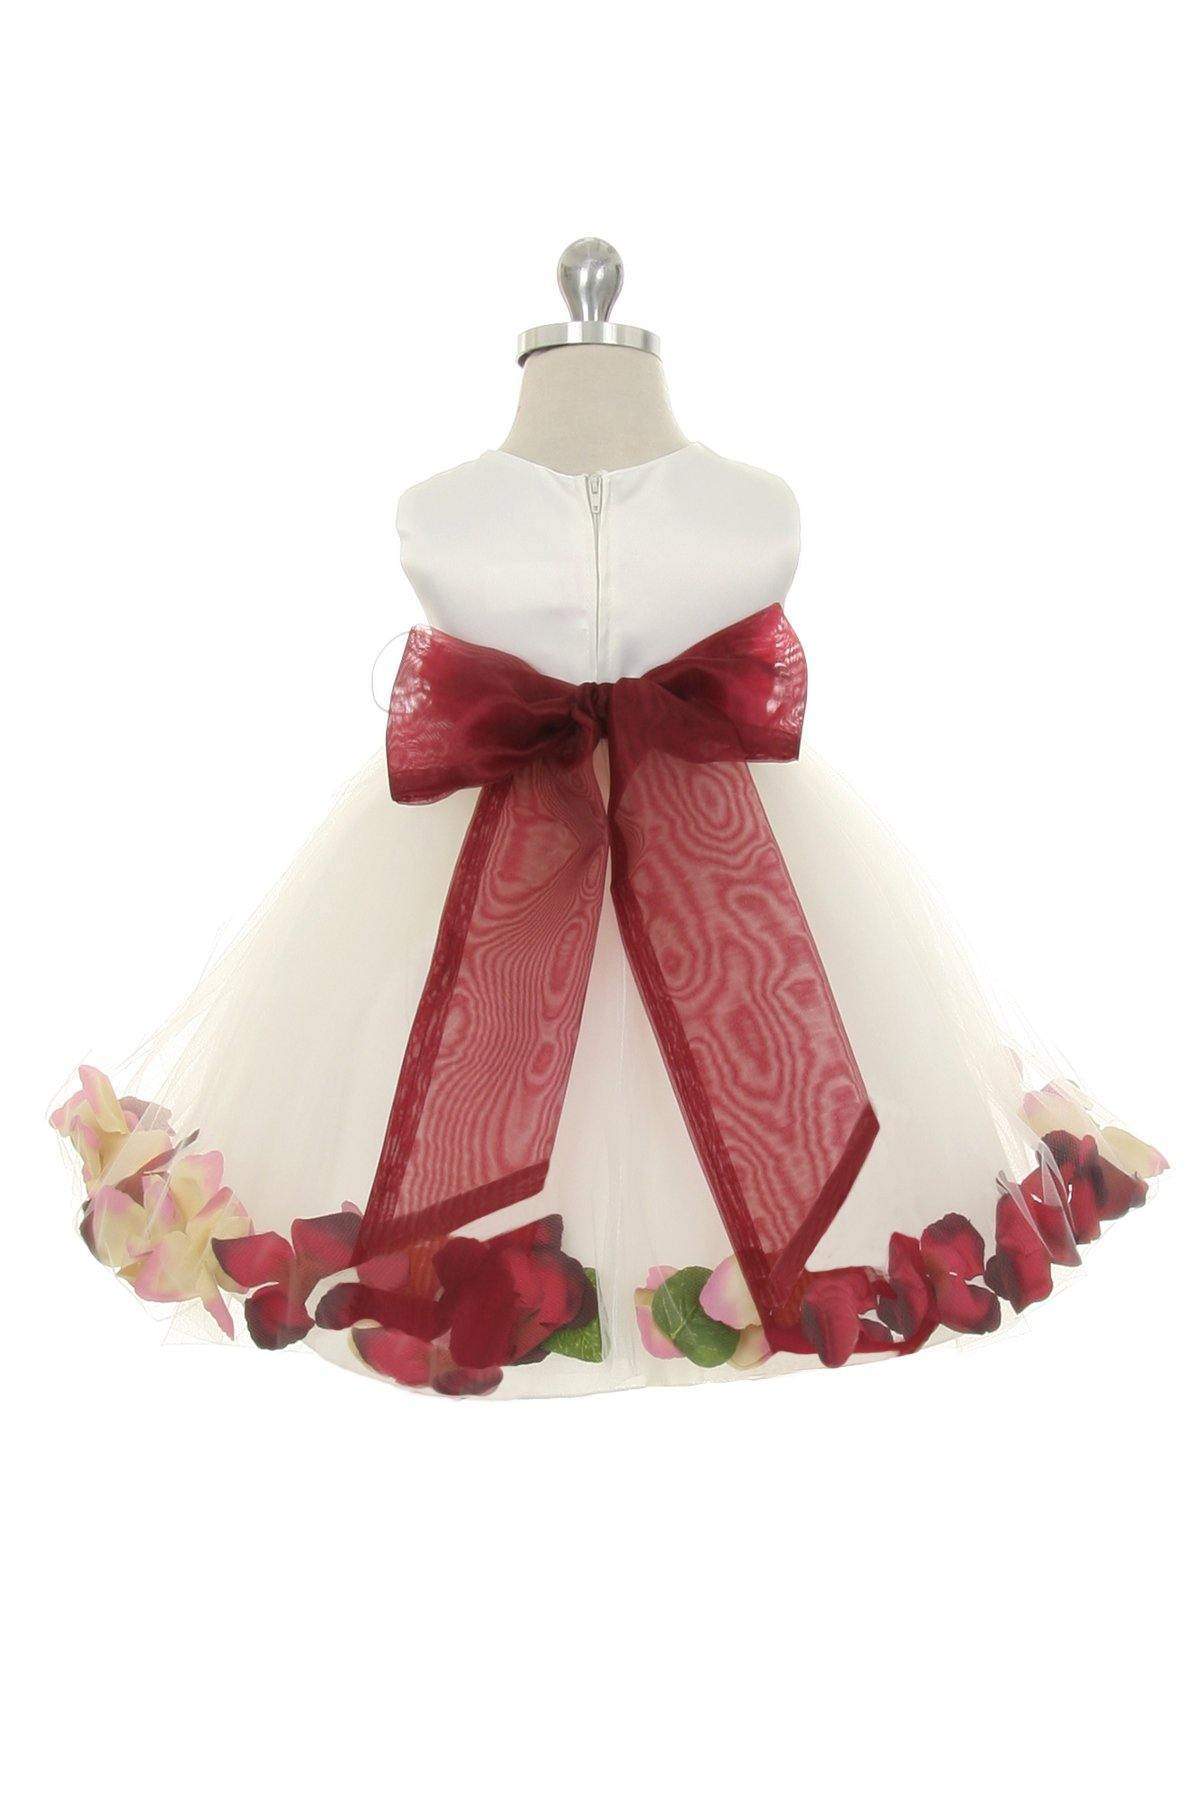 Satin Flower Petal Dress for Baby (18 Colors)-Kid's Dream-baby-dress,baby_girl,color_Dusty Rose,color_Ivory,color_White,fabric_Satin,fabric_Tulle,meta-related-collection-shop-the-outfit-baby,size_L-18 Months,size_M-12 Months,size_S-6 Months,size_XL-24 Months